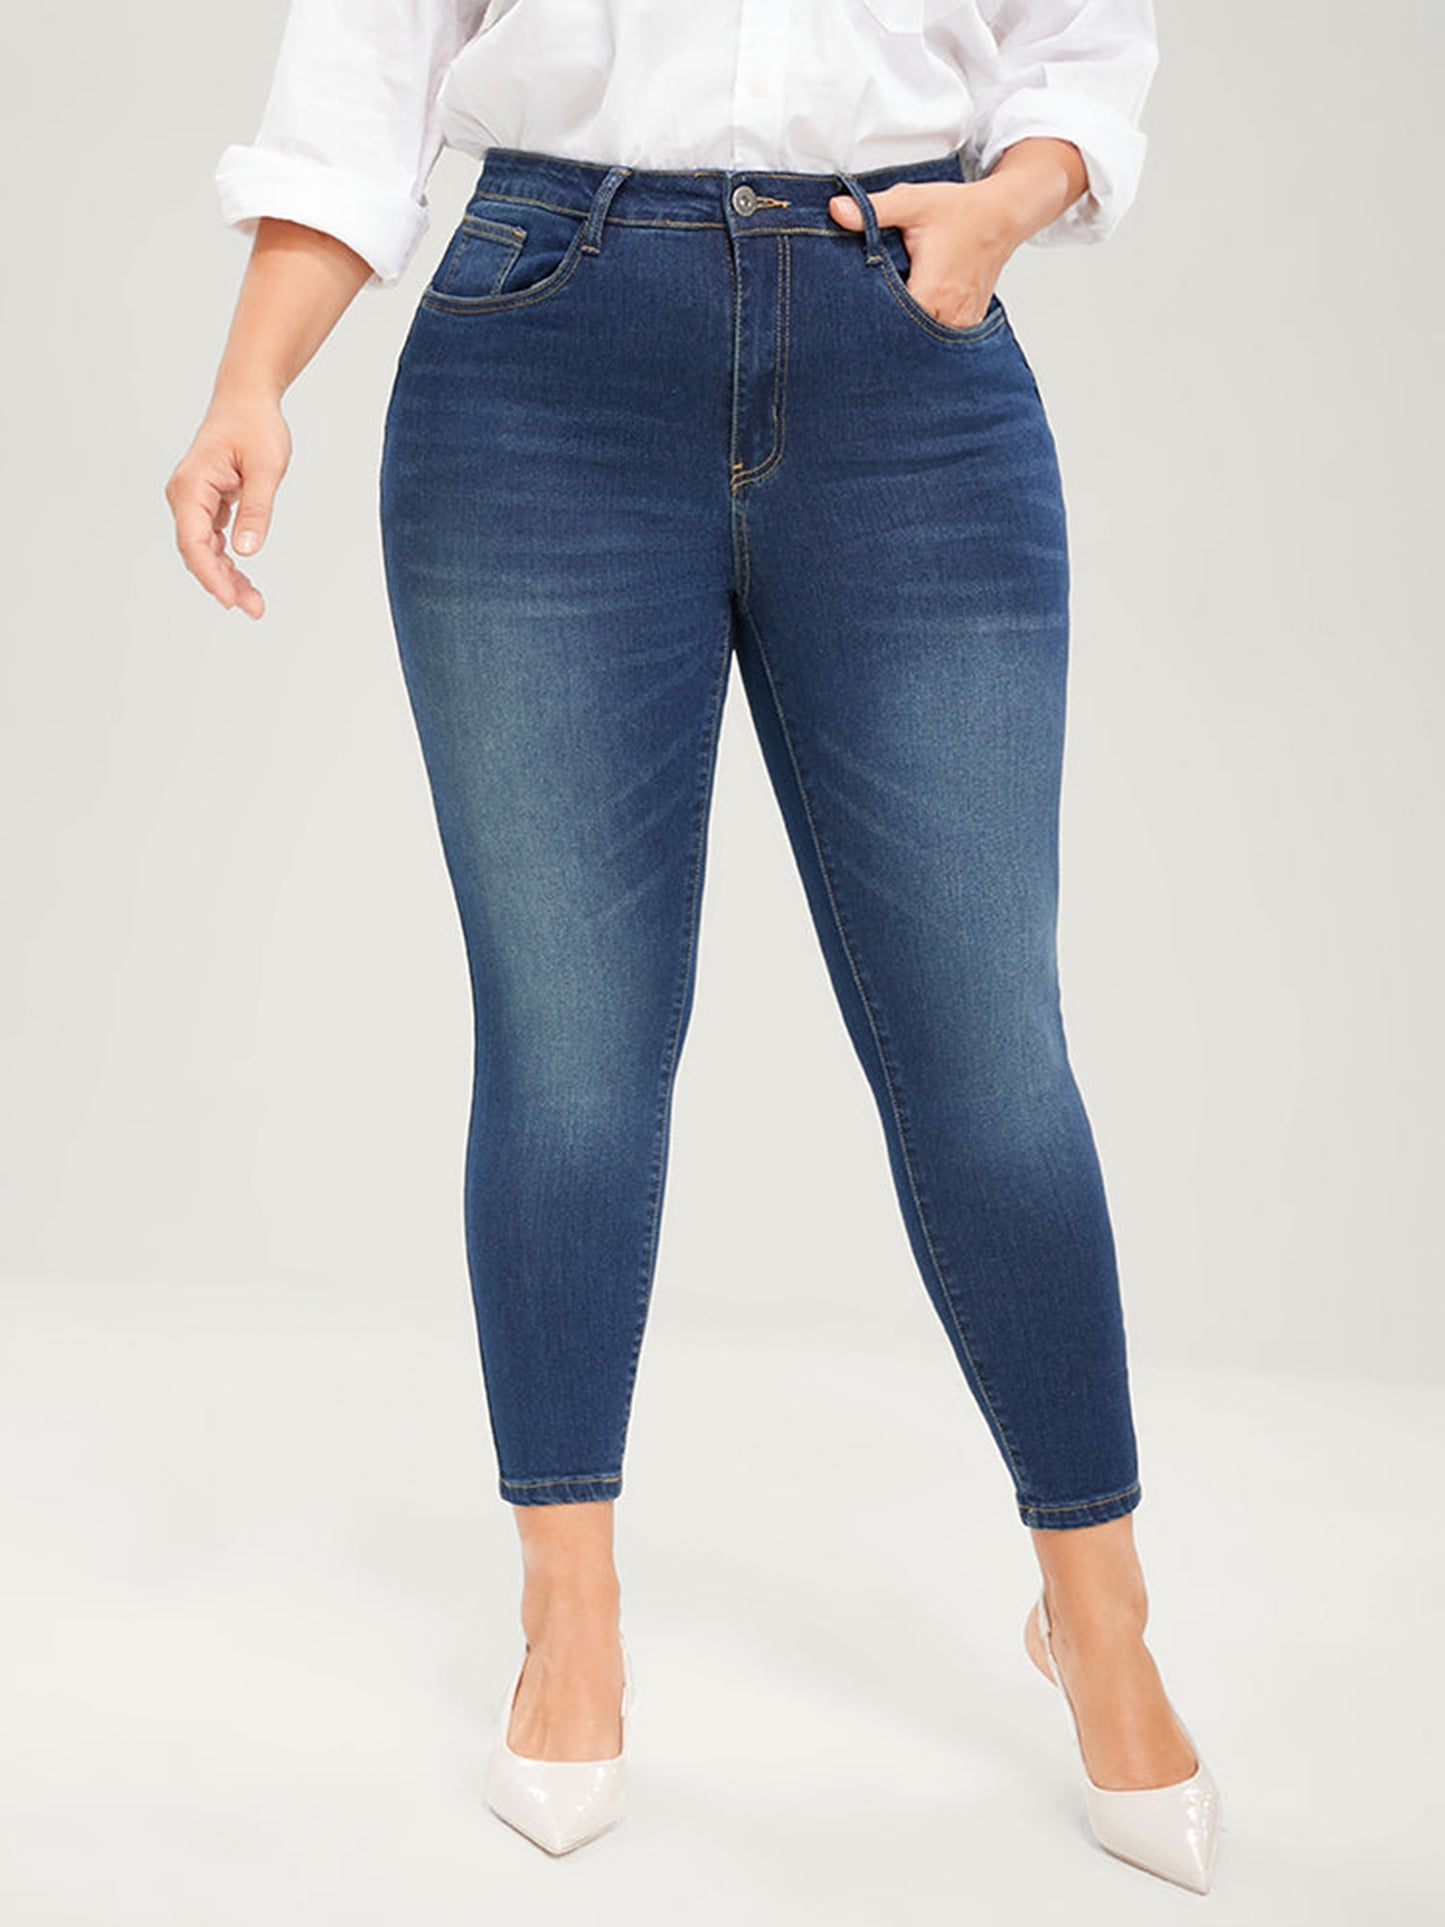 Plus Size Pencil Jeans for Women 100 Kgs Full Length Skinny Denim Pants High Waist Stretchy Washed Women Jeans Dark Blue Jeans